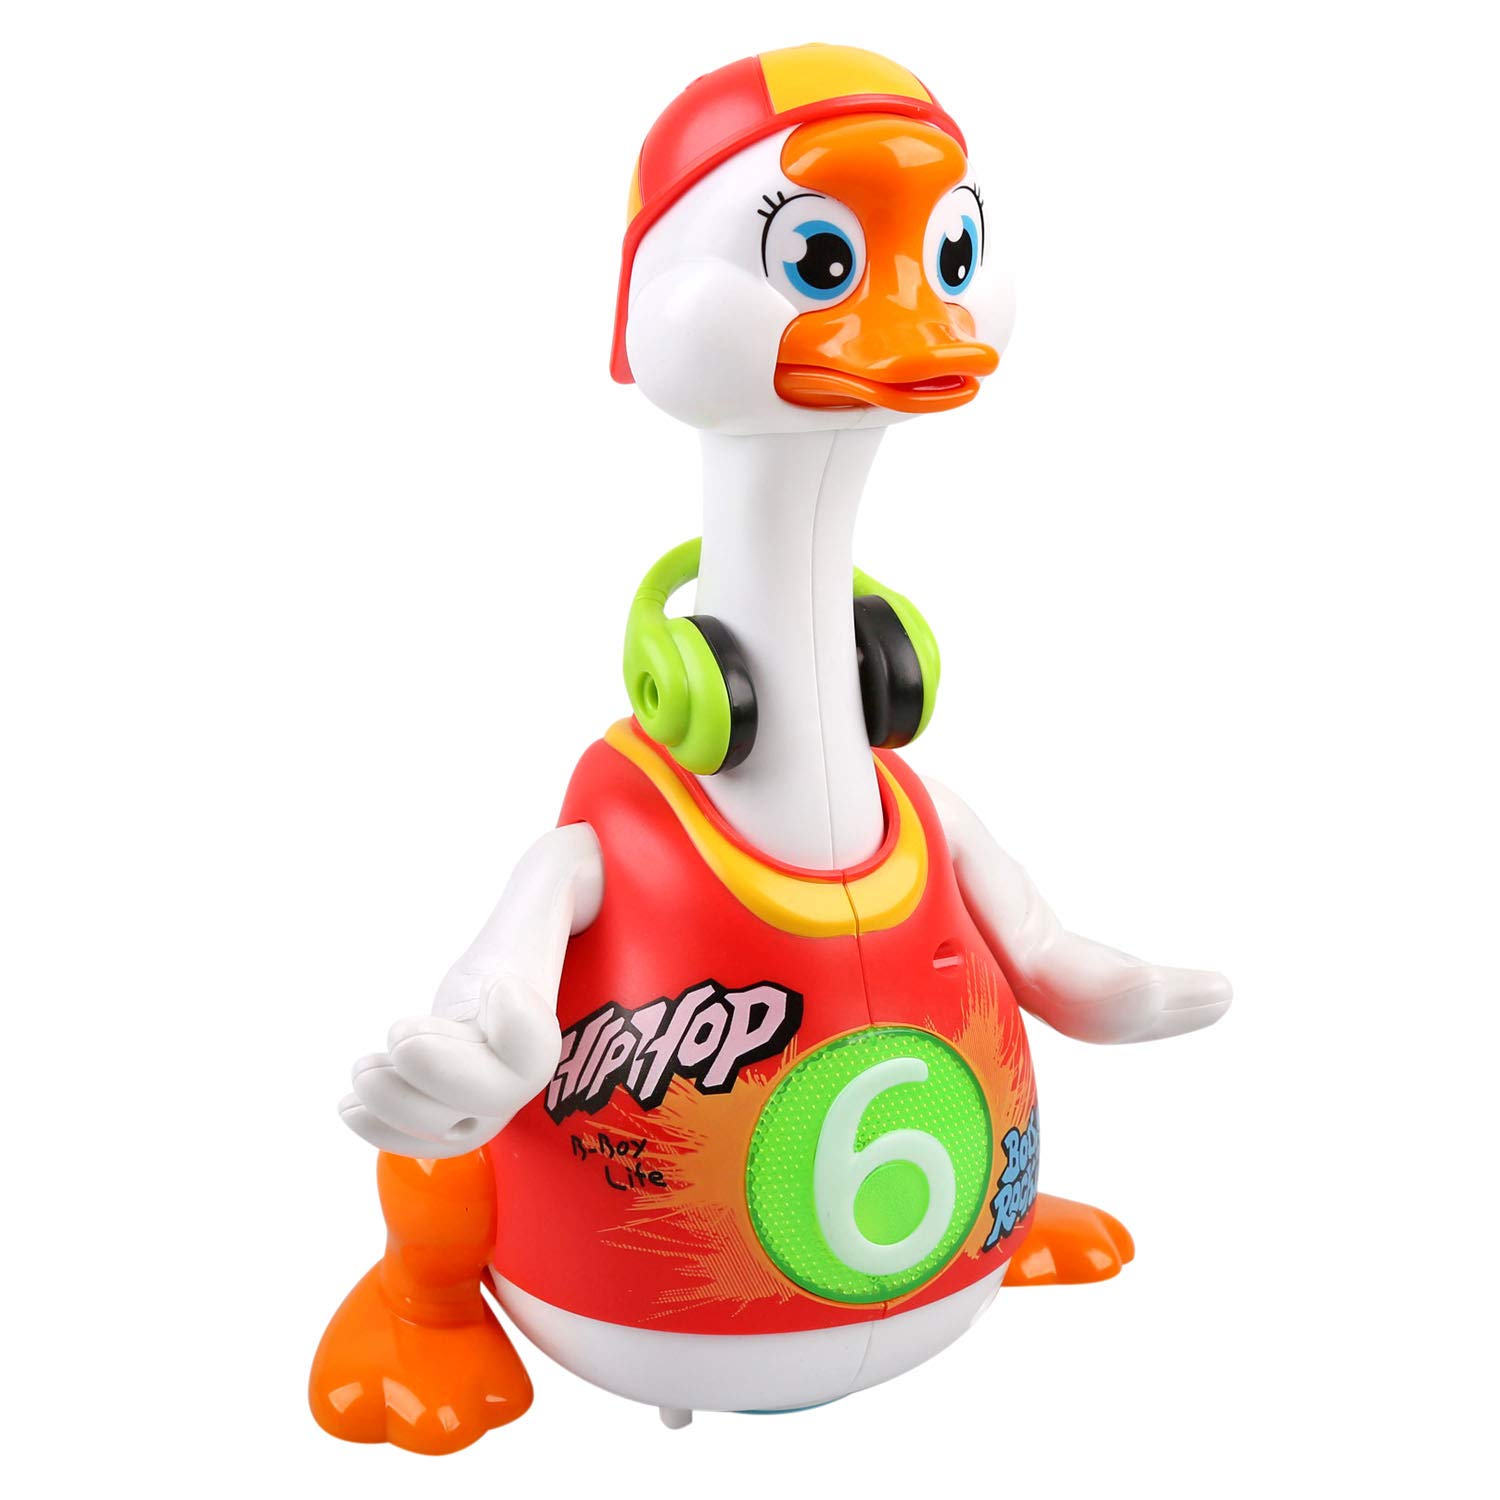 URBAN KIT Dancing Hip Hop Goose Development Musical Toy | Hip Hop Goose Toy | Toddler Dancing | Rapping Duck | Dancing Toy for Toddler | Singing Toys for Toddlers-Red - image 3 of 6